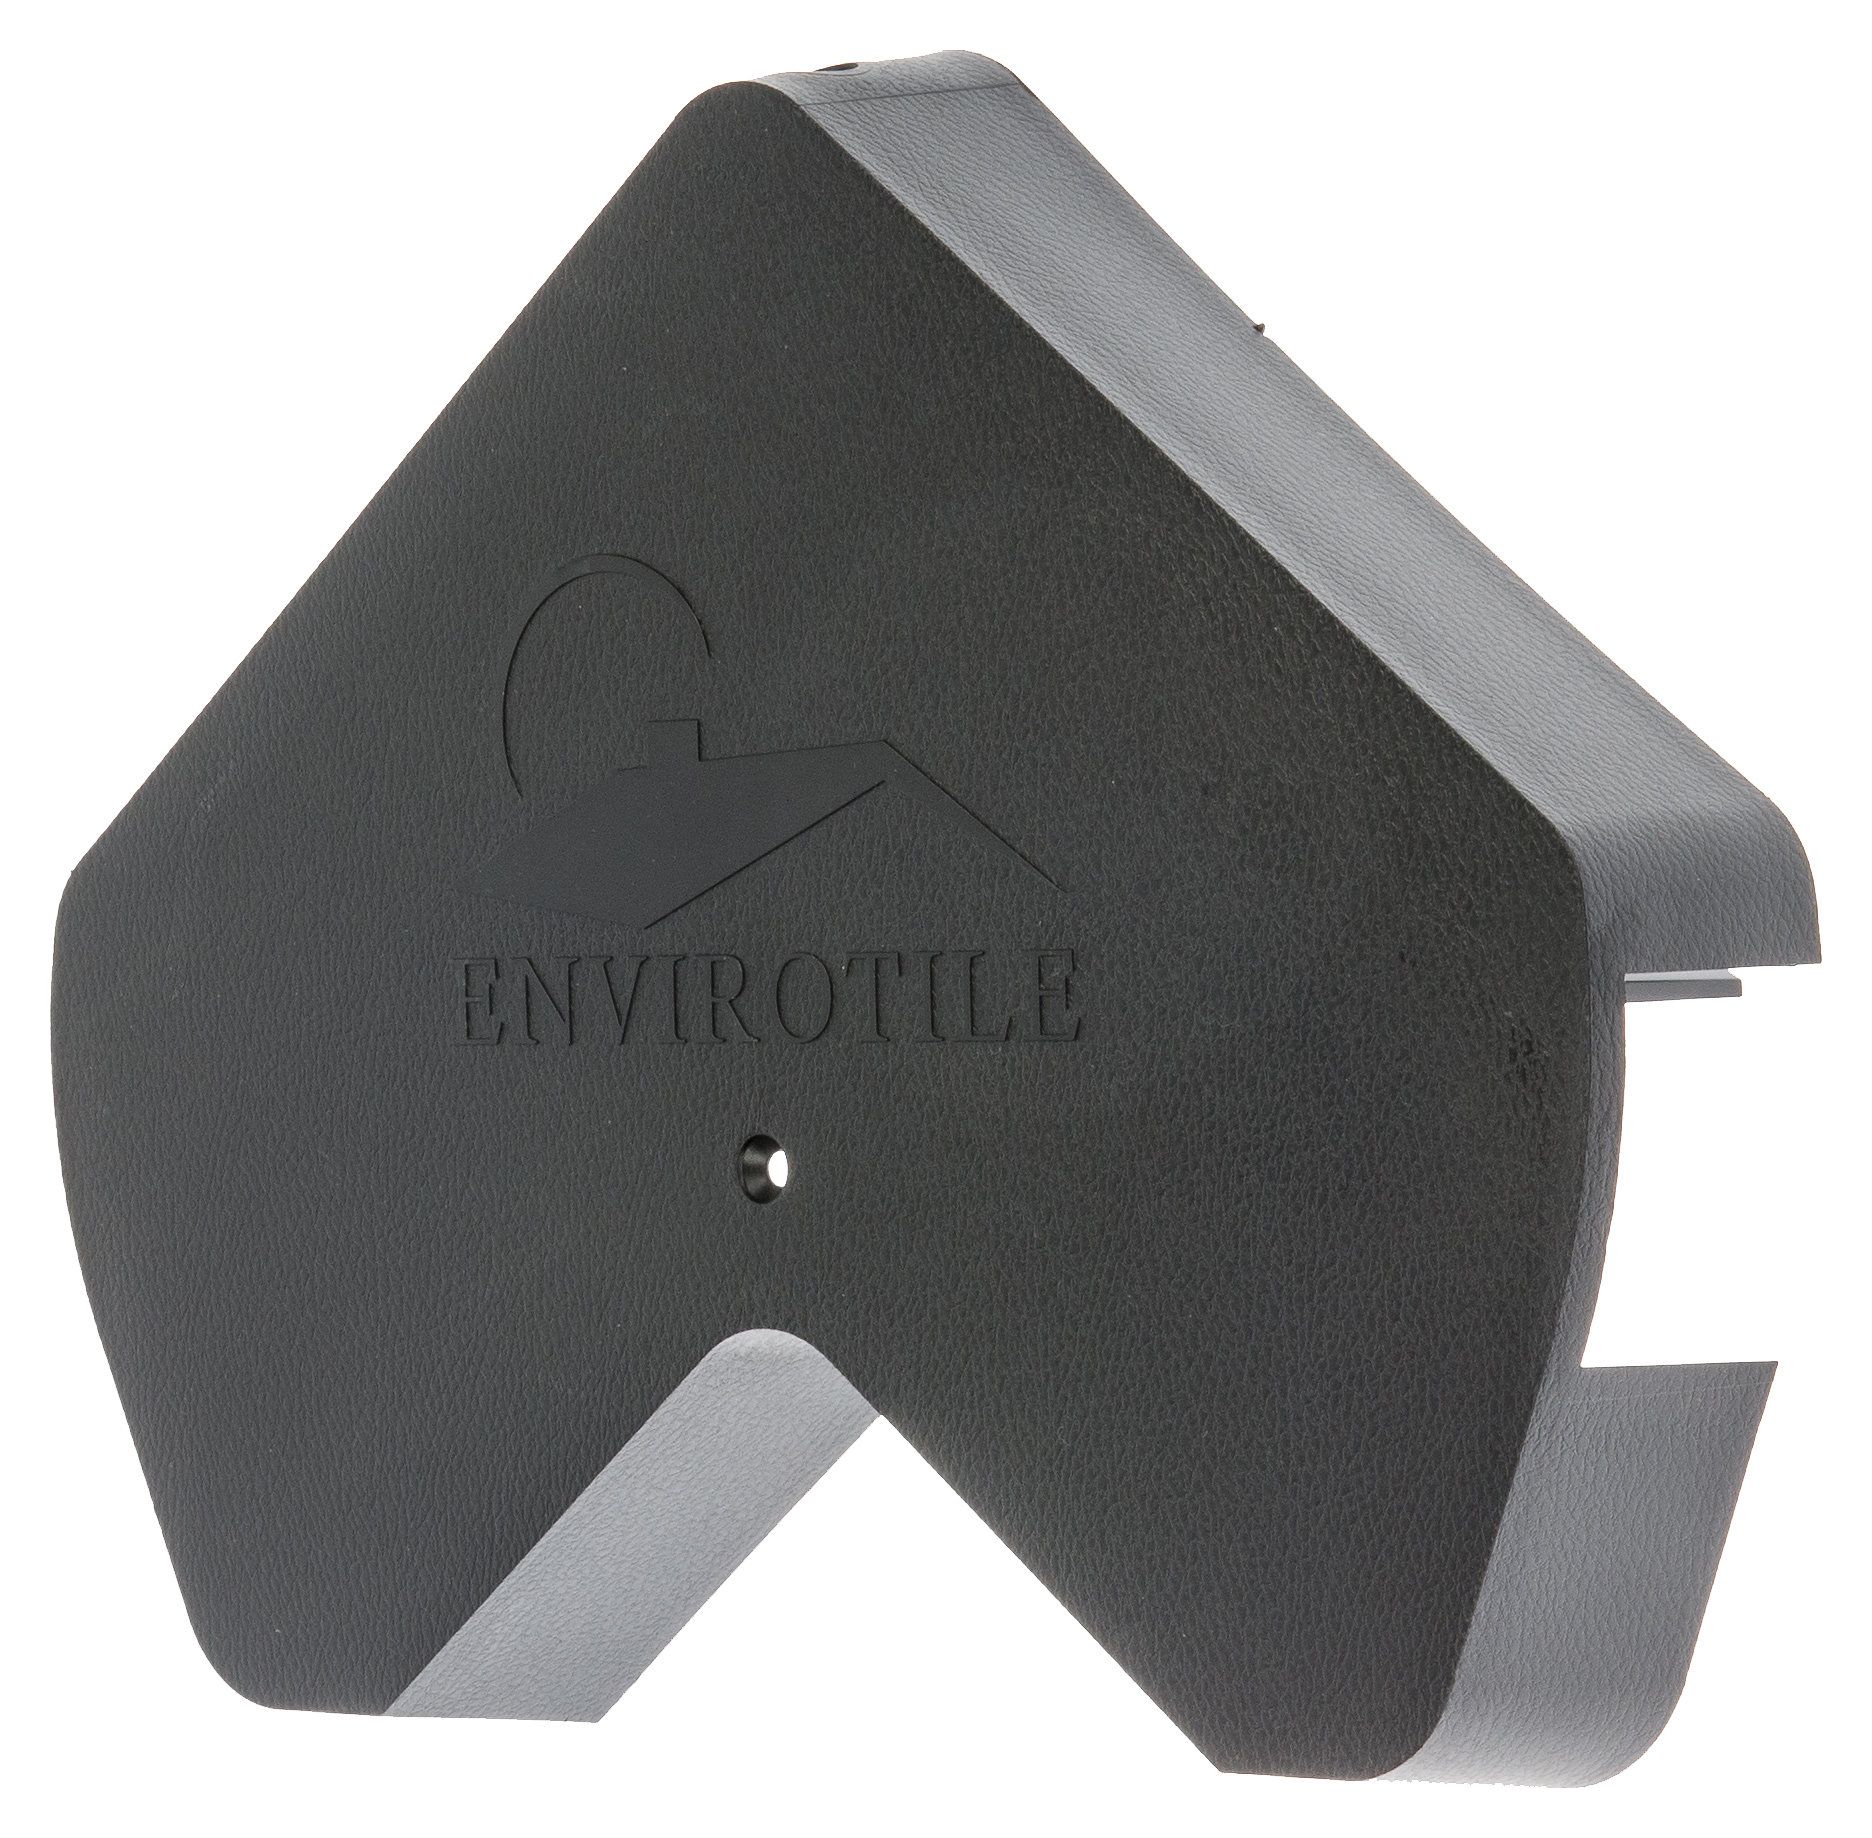 Image of Envirotile Anthracite Gable End Cap - 30 x 300 x 6mm